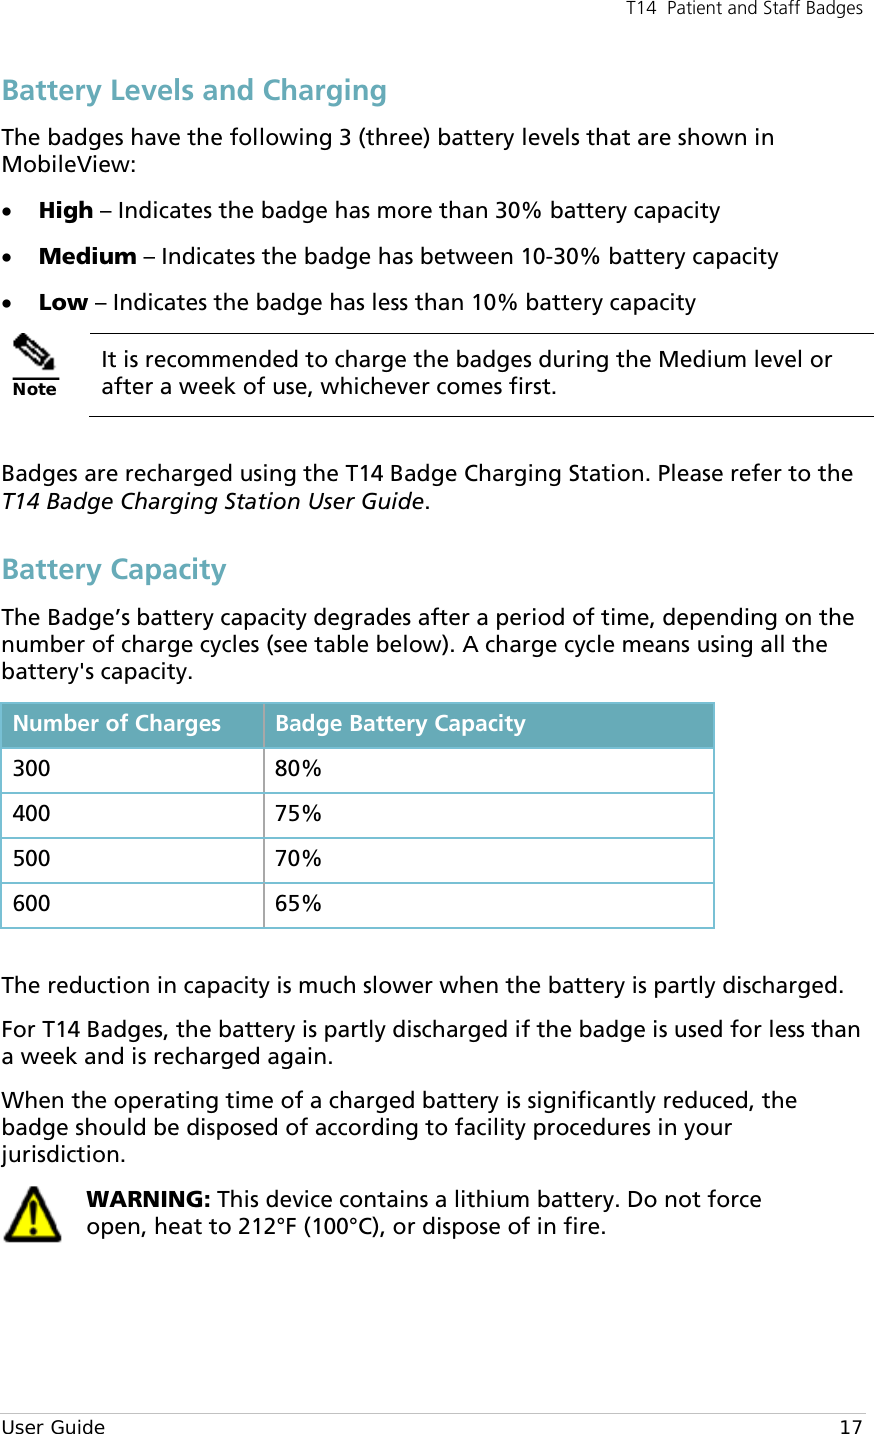 T14  Patient and Staff Badges  User Guide    17 Battery Levels and Charging The badges have the following 3 (three) battery levels that are shown in MobileView: • High – Indicates the badge has more than 30% battery capacity  • Medium – Indicates the badge has between 10-30% battery capacity • Low – Indicates the badge has less than 10% battery capacity  Note It is recommended to charge the badges during the Medium level or after a week of use, whichever comes first.  Badges are recharged using the T14 Badge Charging Station. Please refer to the T14 Badge Charging Station User Guide. Battery Capacity The Badge’s battery capacity degrades after a period of time, depending on the number of charge cycles (see table below). A charge cycle means using all the battery&apos;s capacity. Number of Charges Badge Battery Capacity 300 80% 400 75% 500 70% 600 65%  The reduction in capacity is much slower when the battery is partly discharged.  For T14 Badges, the battery is partly discharged if the badge is used for less than a week and is recharged again. When the operating time of a charged battery is significantly reduced, the badge should be disposed of according to facility procedures in your jurisdiction.  WARNING: This device contains a lithium battery. Do not force open, heat to 212°F (100°C), or dispose of in fire. 